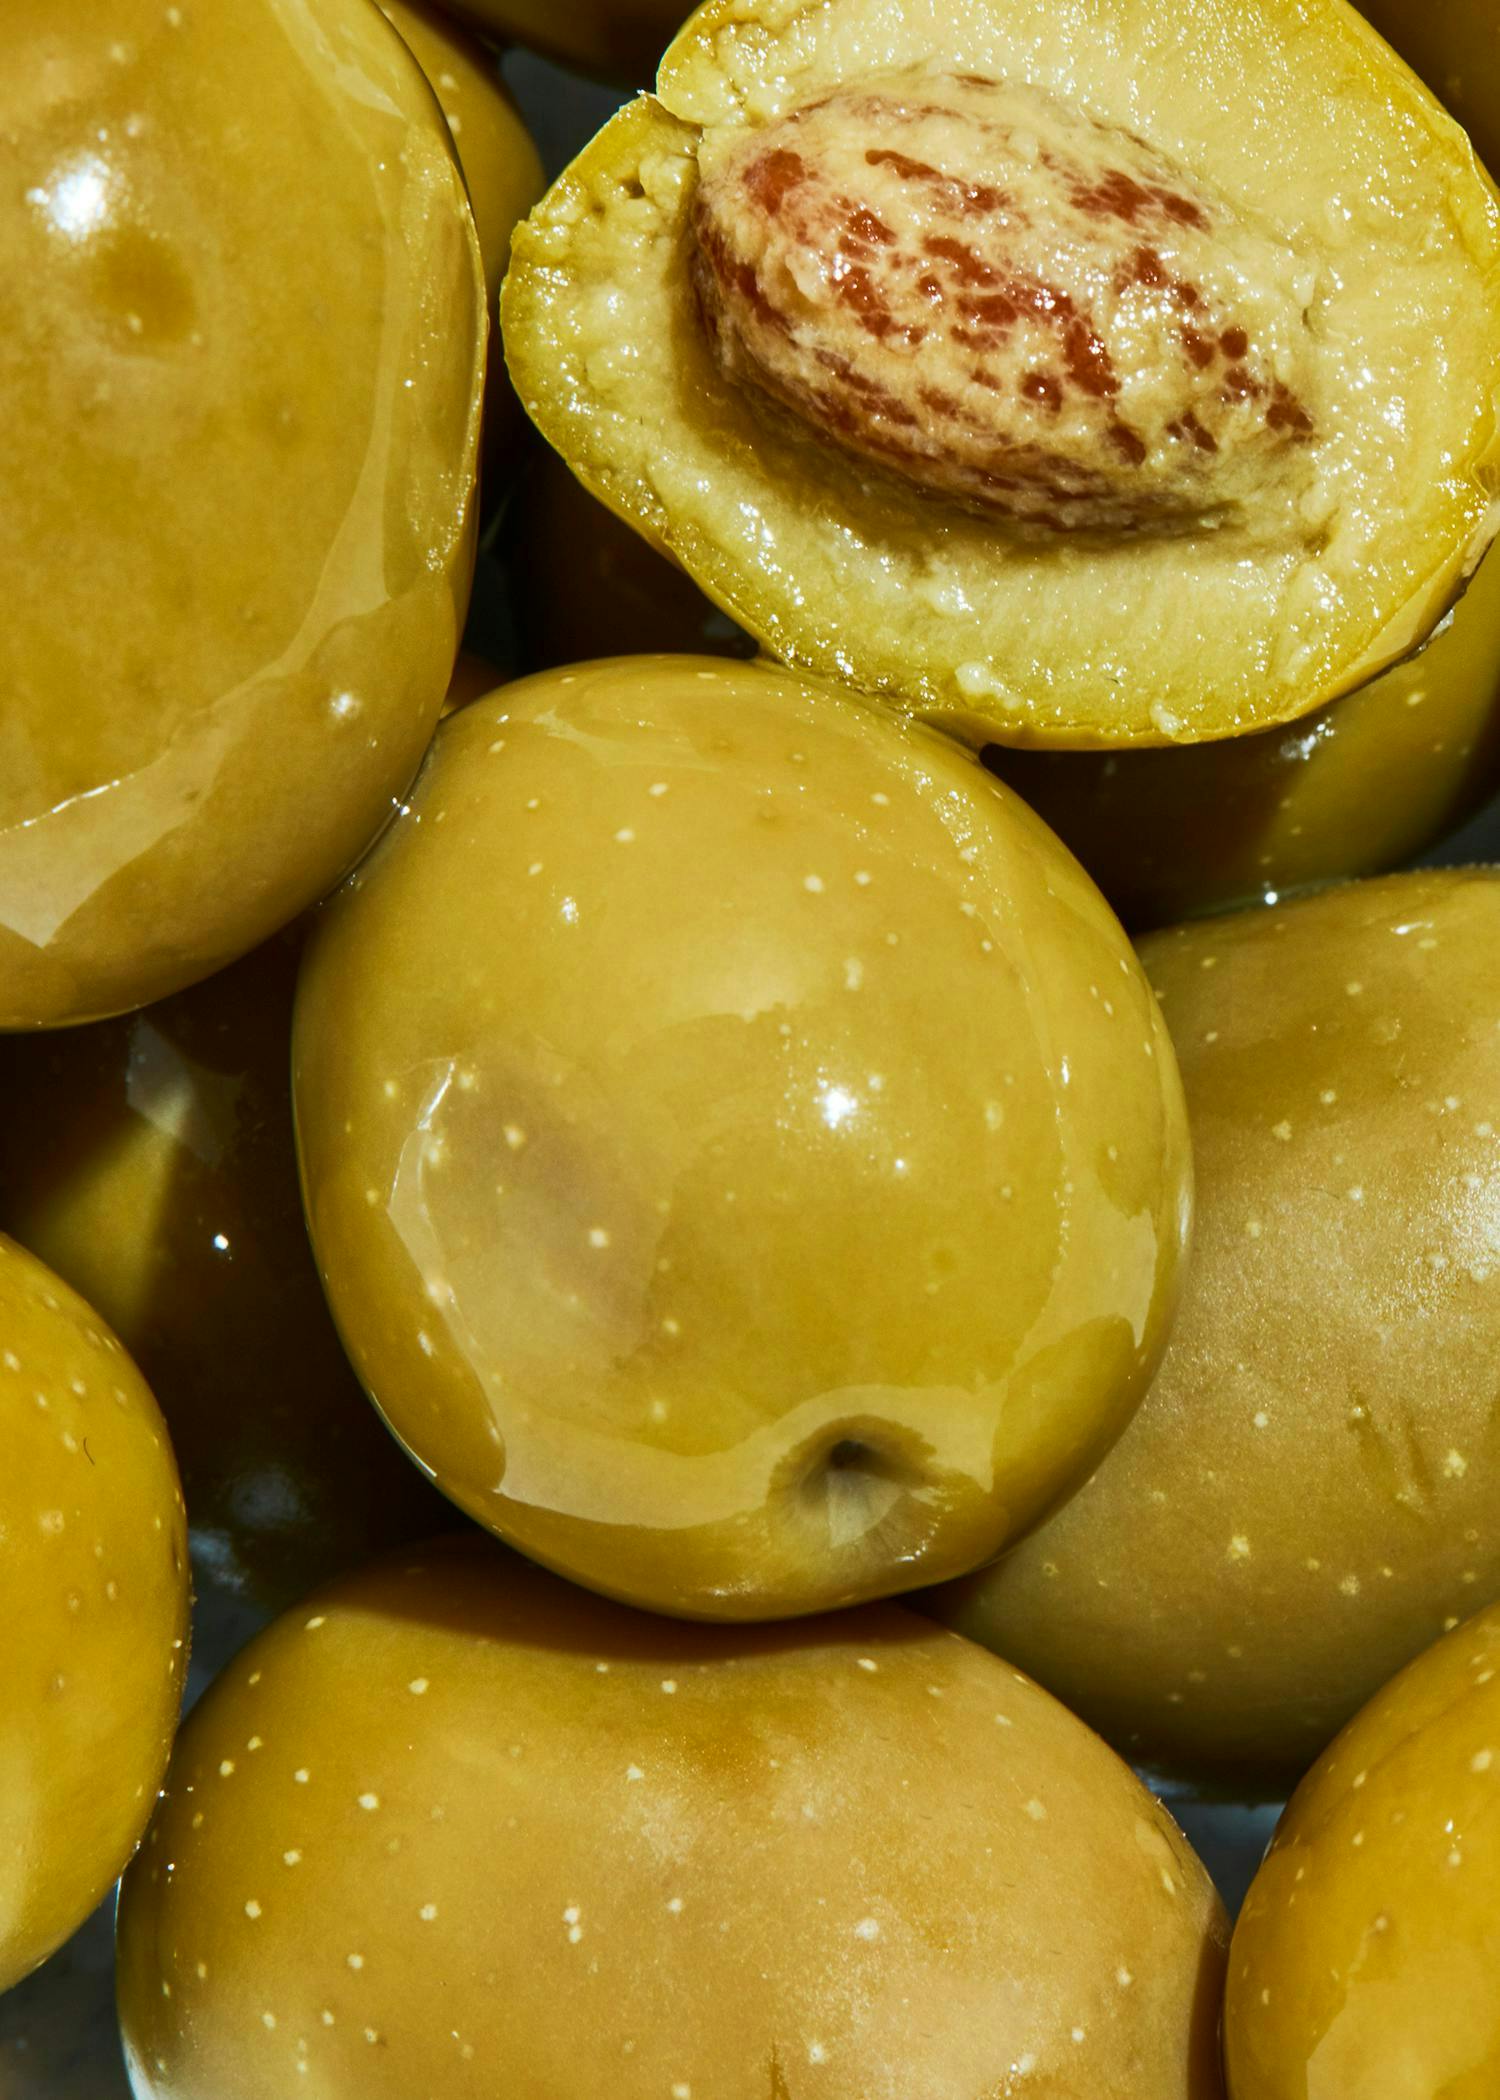 On a spoon: olives and olive oil